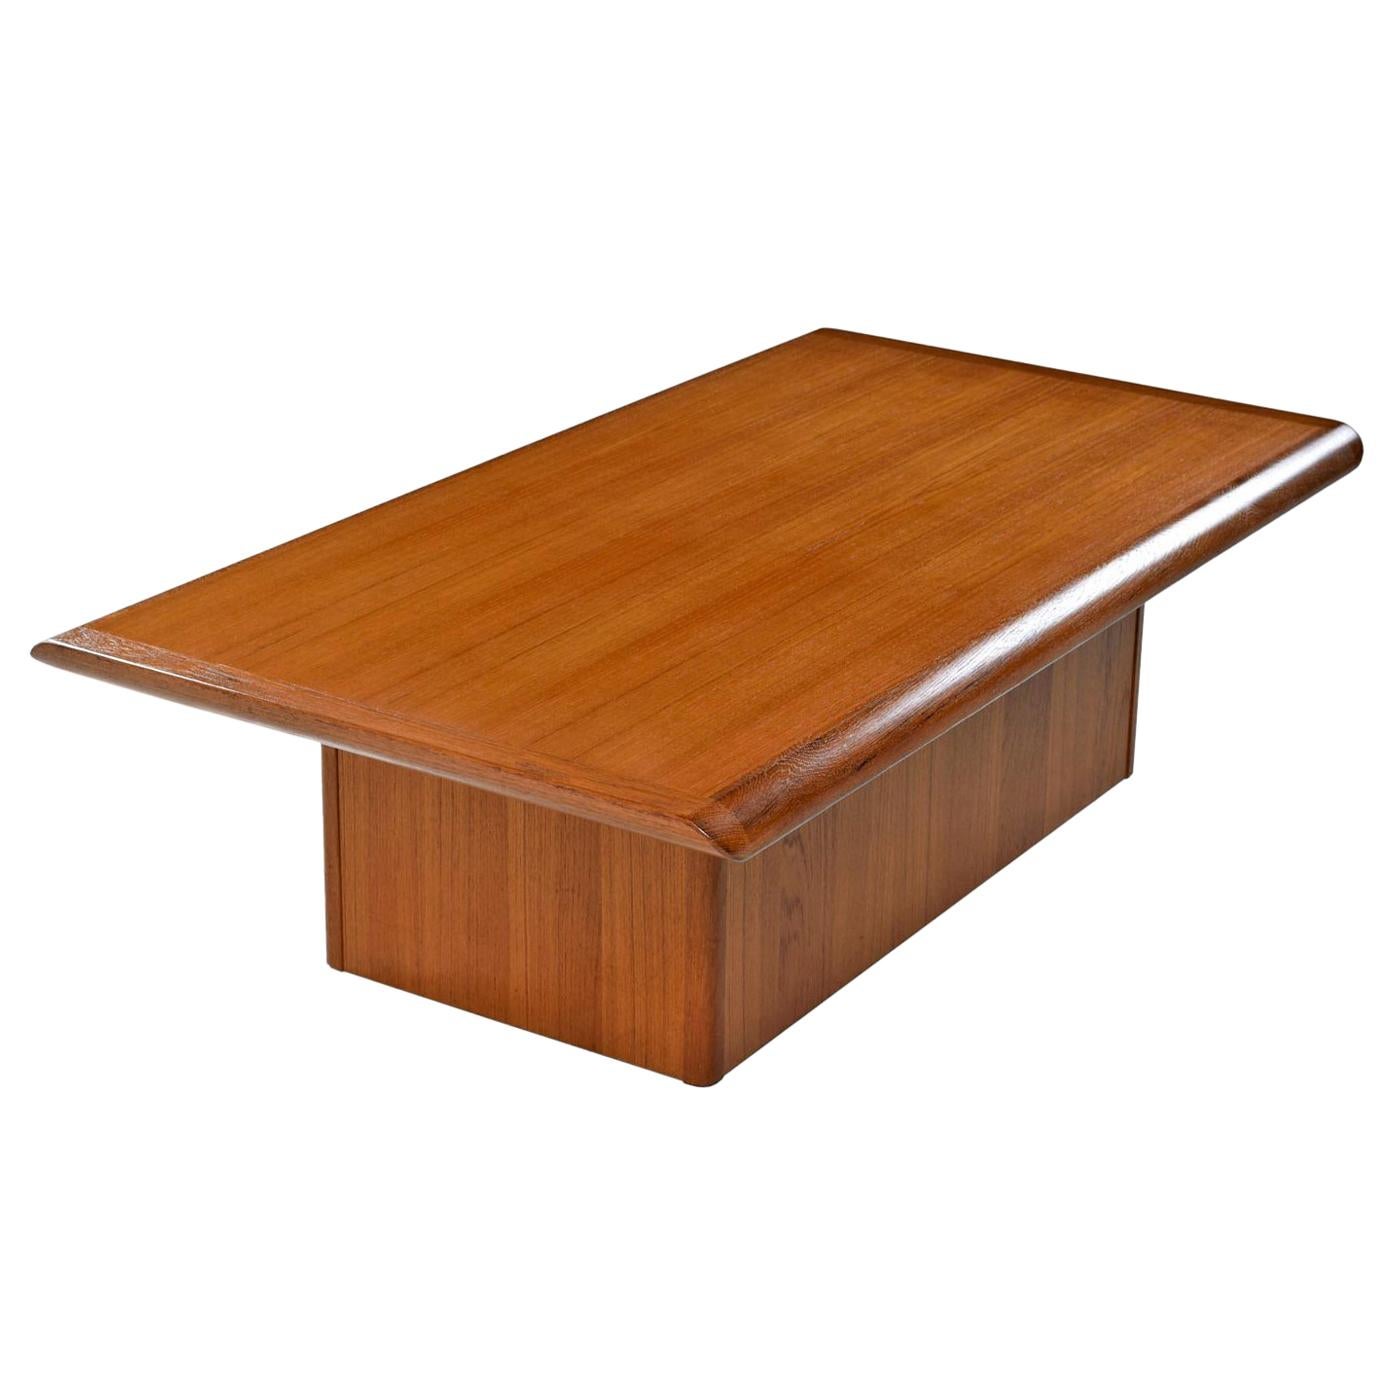 This piece of Danish artistry firmly hold its own as it stands on a monumental pedestal base. Rich, dark amber patina and stunning cathedral grain teak. Made by Vejle Stole & Møbelfabrik. The teak tabletop has been professionally refinished by our